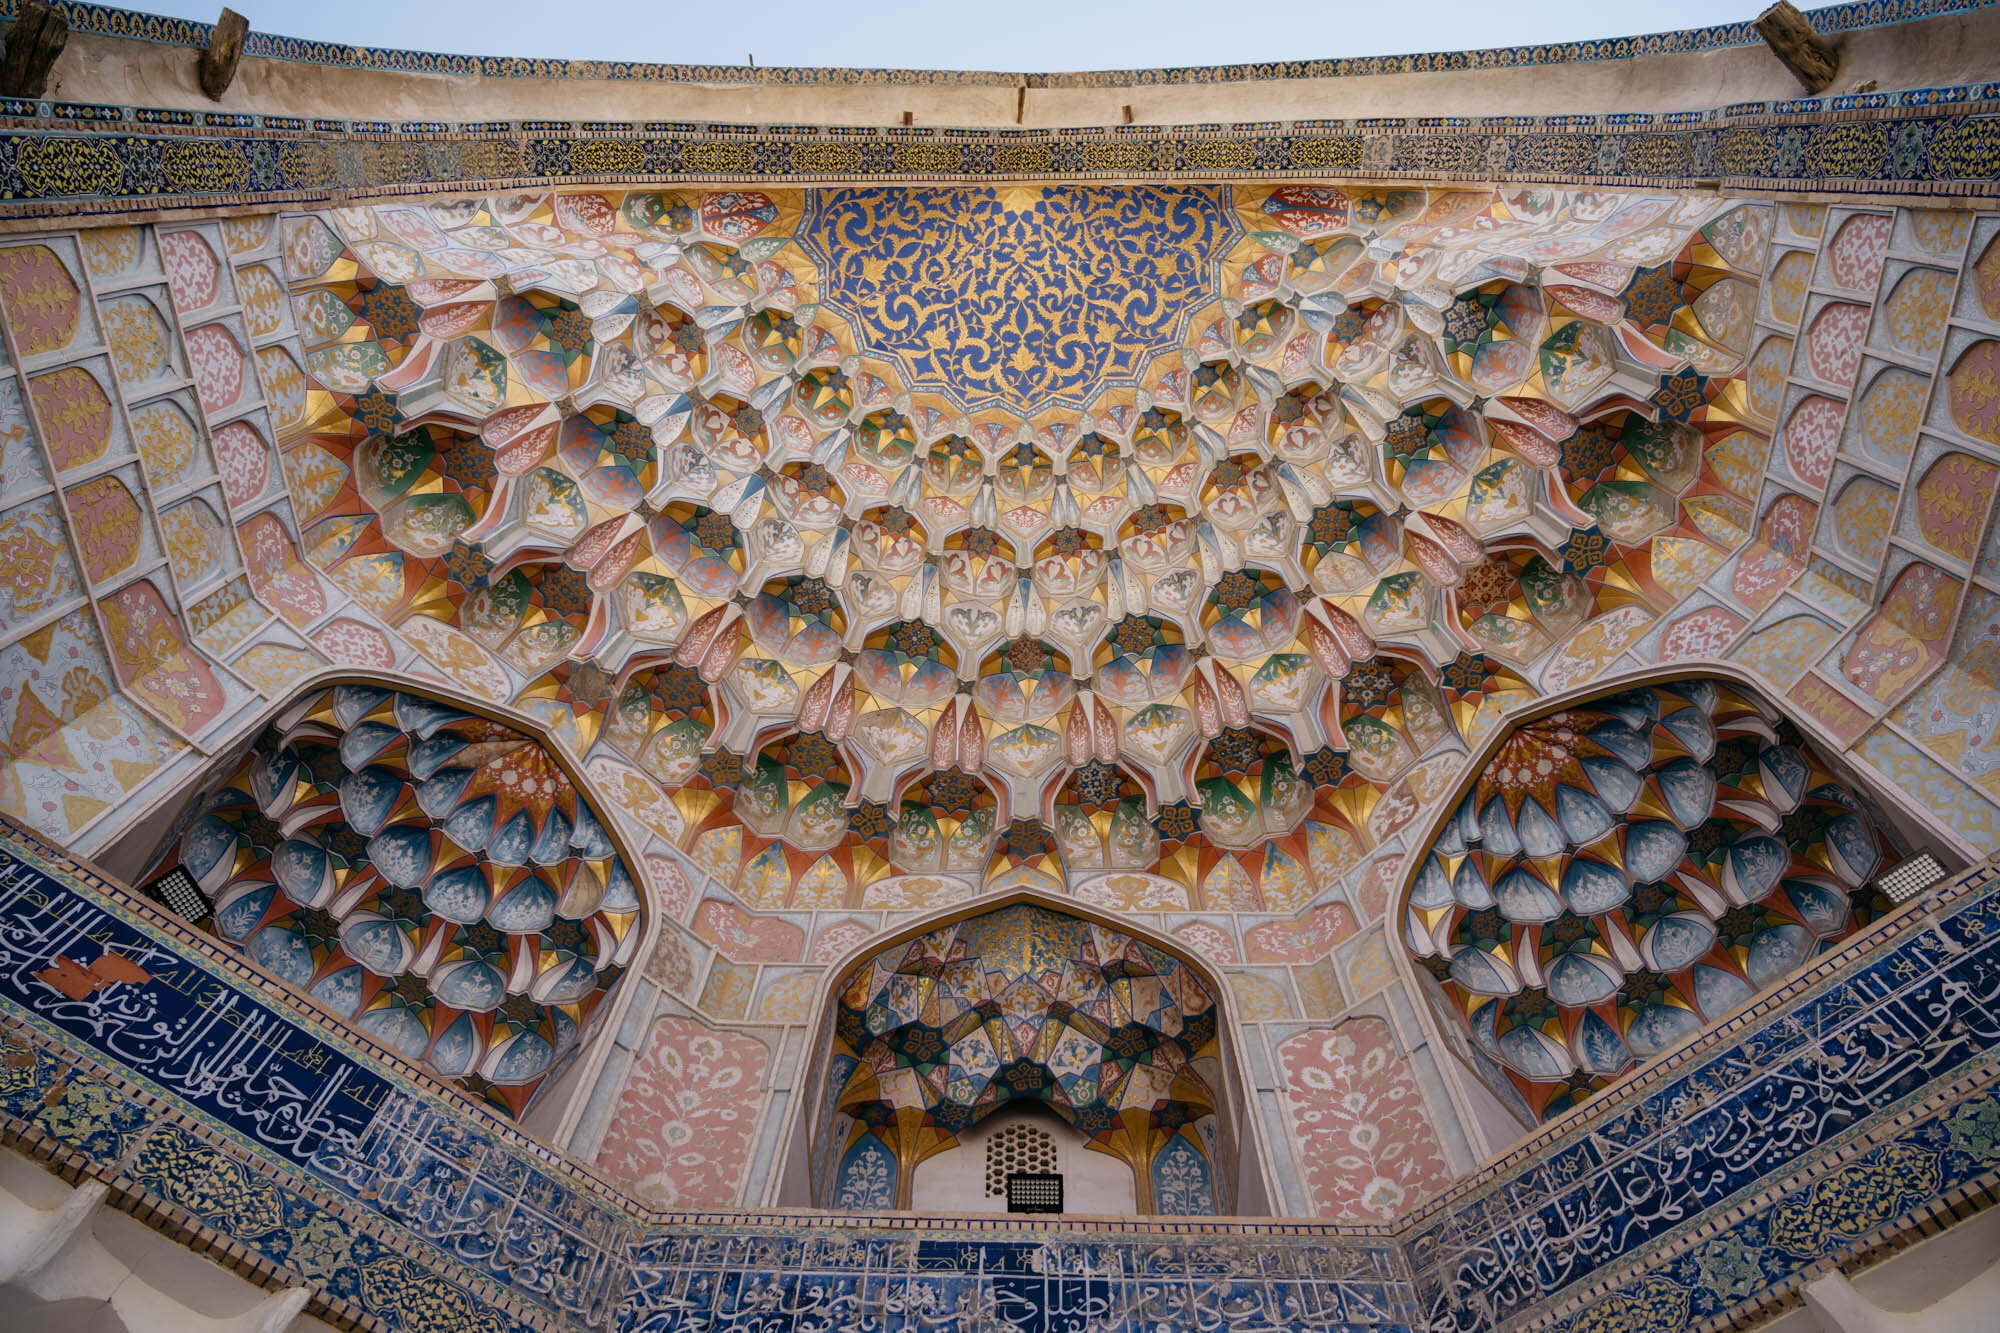  Ceiling details from the Abdullazizkhan Madrassa, Bukhara. 